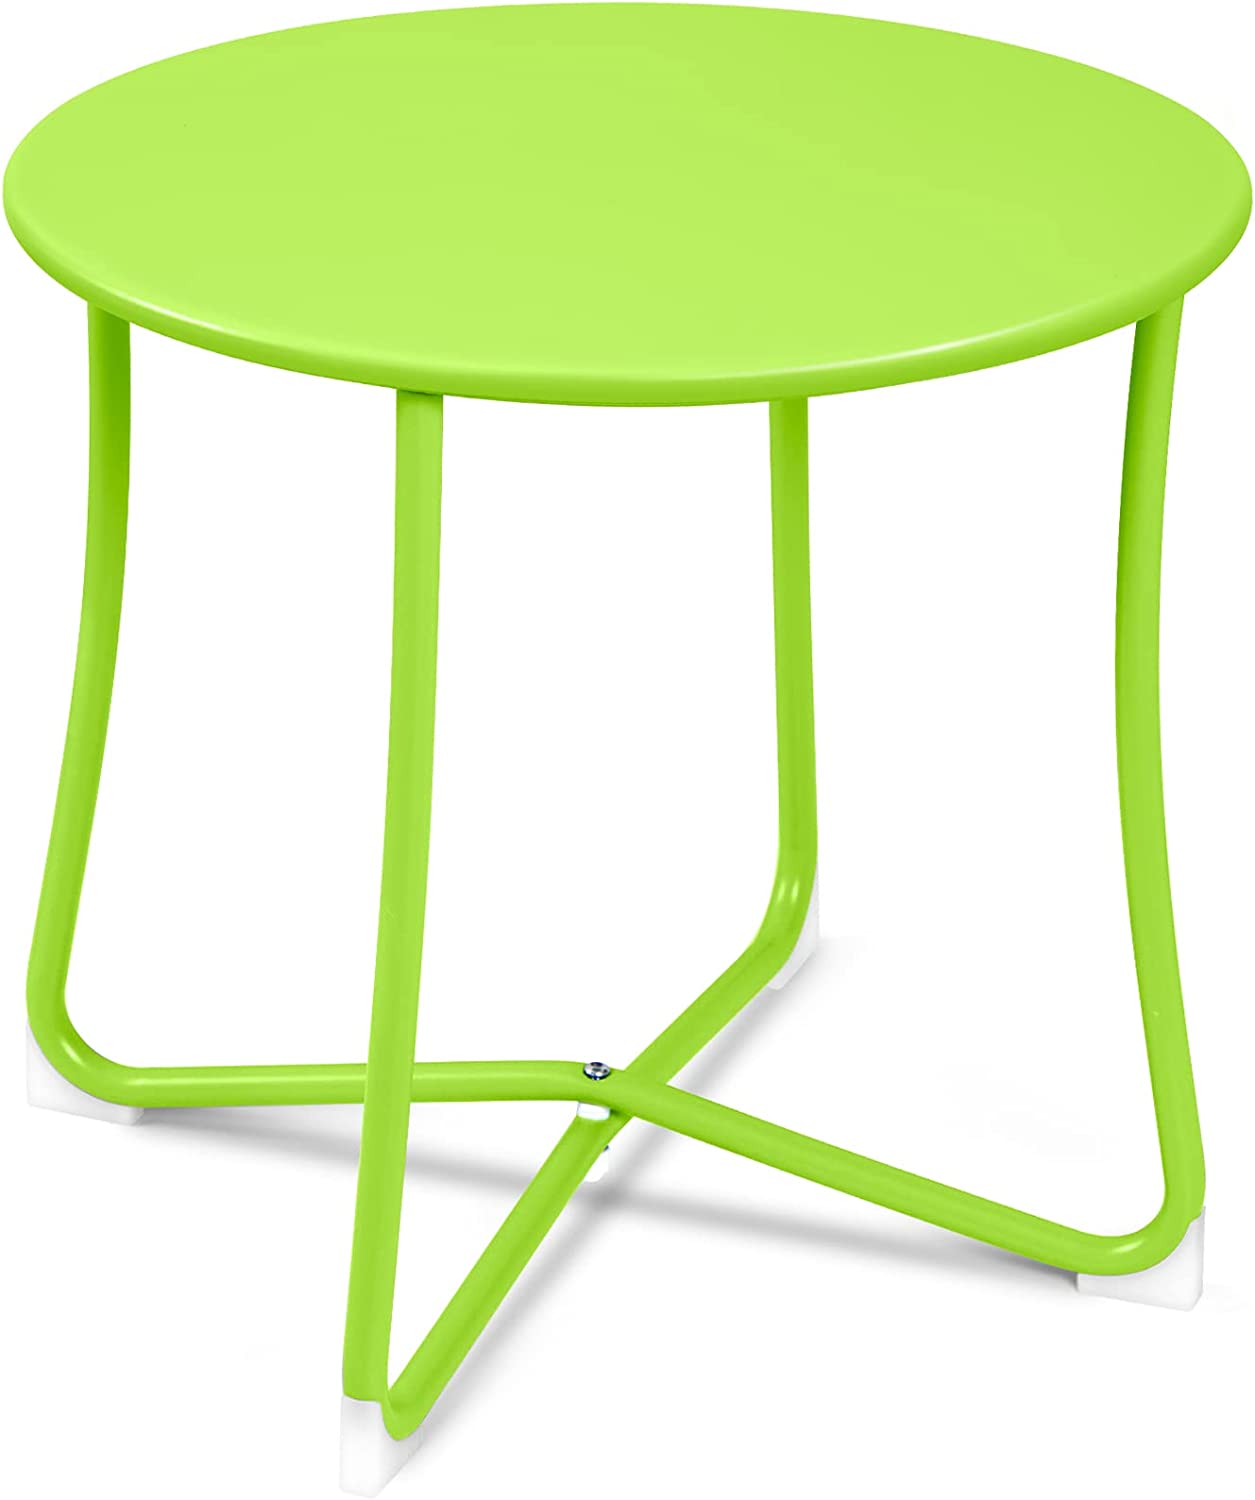 Amagabeli Metal Patio Side Table 18 x 18 Heavy Duty Weather Resistant Anti-Rust Outdoor End Table Small Steel Round Coffee Table Porch Table Snack Table for Balcony Garde Lime Green - image 1 of 8